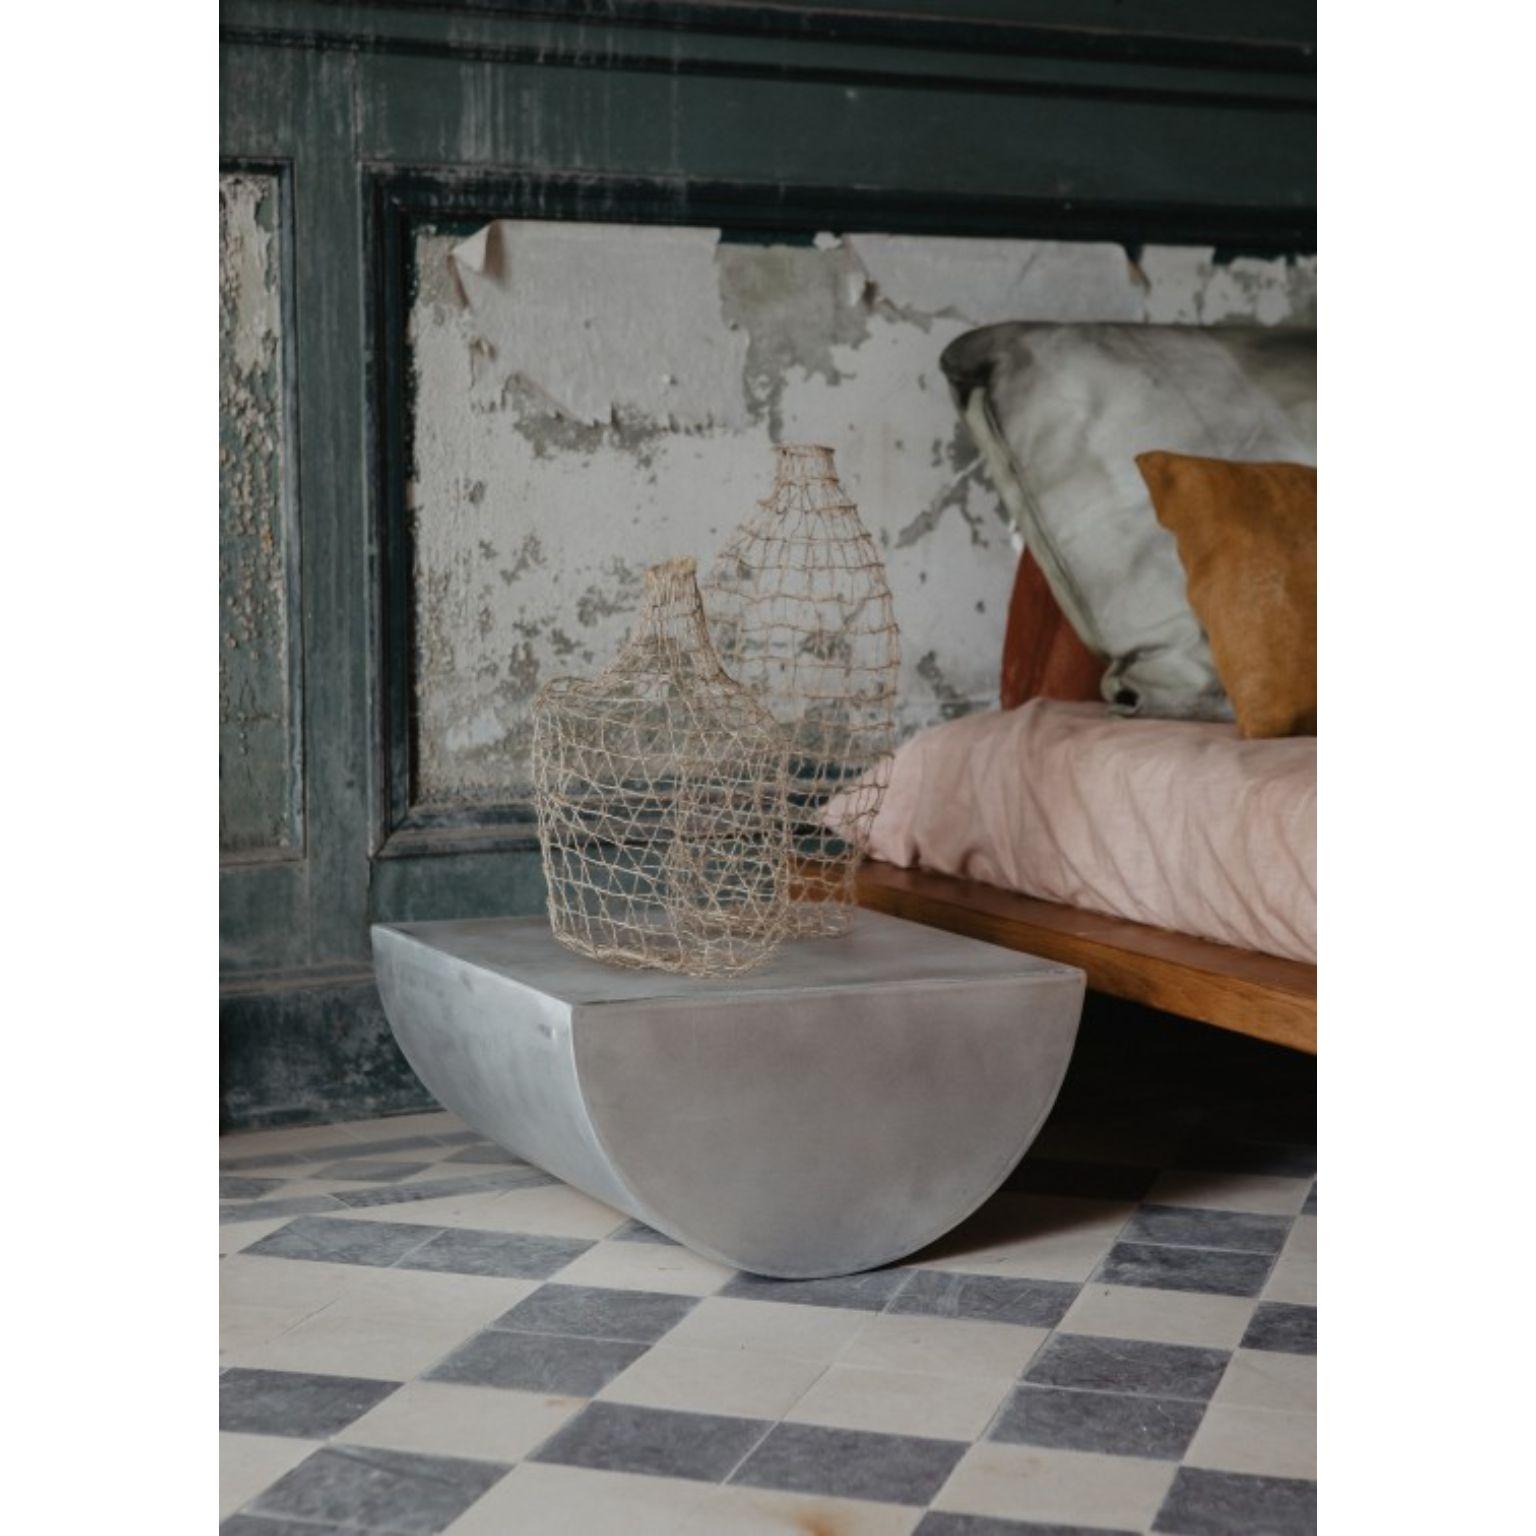 Half Moon Medium Side Table by Mylene Niedzialkowski
Dimensions: D 25 x W 50 x H 61 cm.
Materials: Curved aluminum.

Available in three different sizes: S, M and L. Please contact us.  

A contemporary decorative element made of brushed metal, the